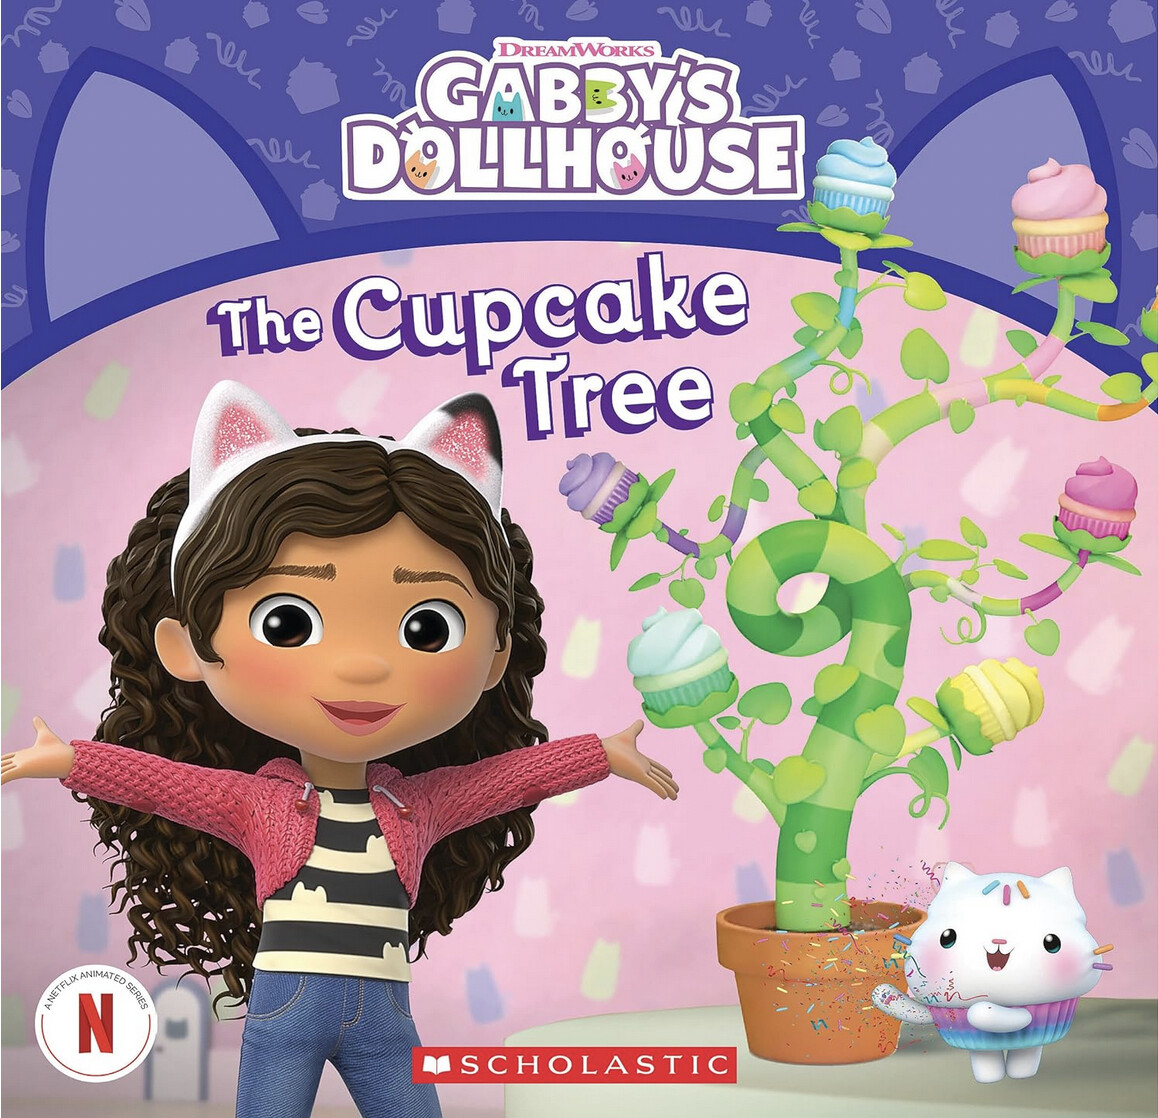 Gabby's Dollhouse #8: The Cupcake Tree (Published by Scholastic Inc.)